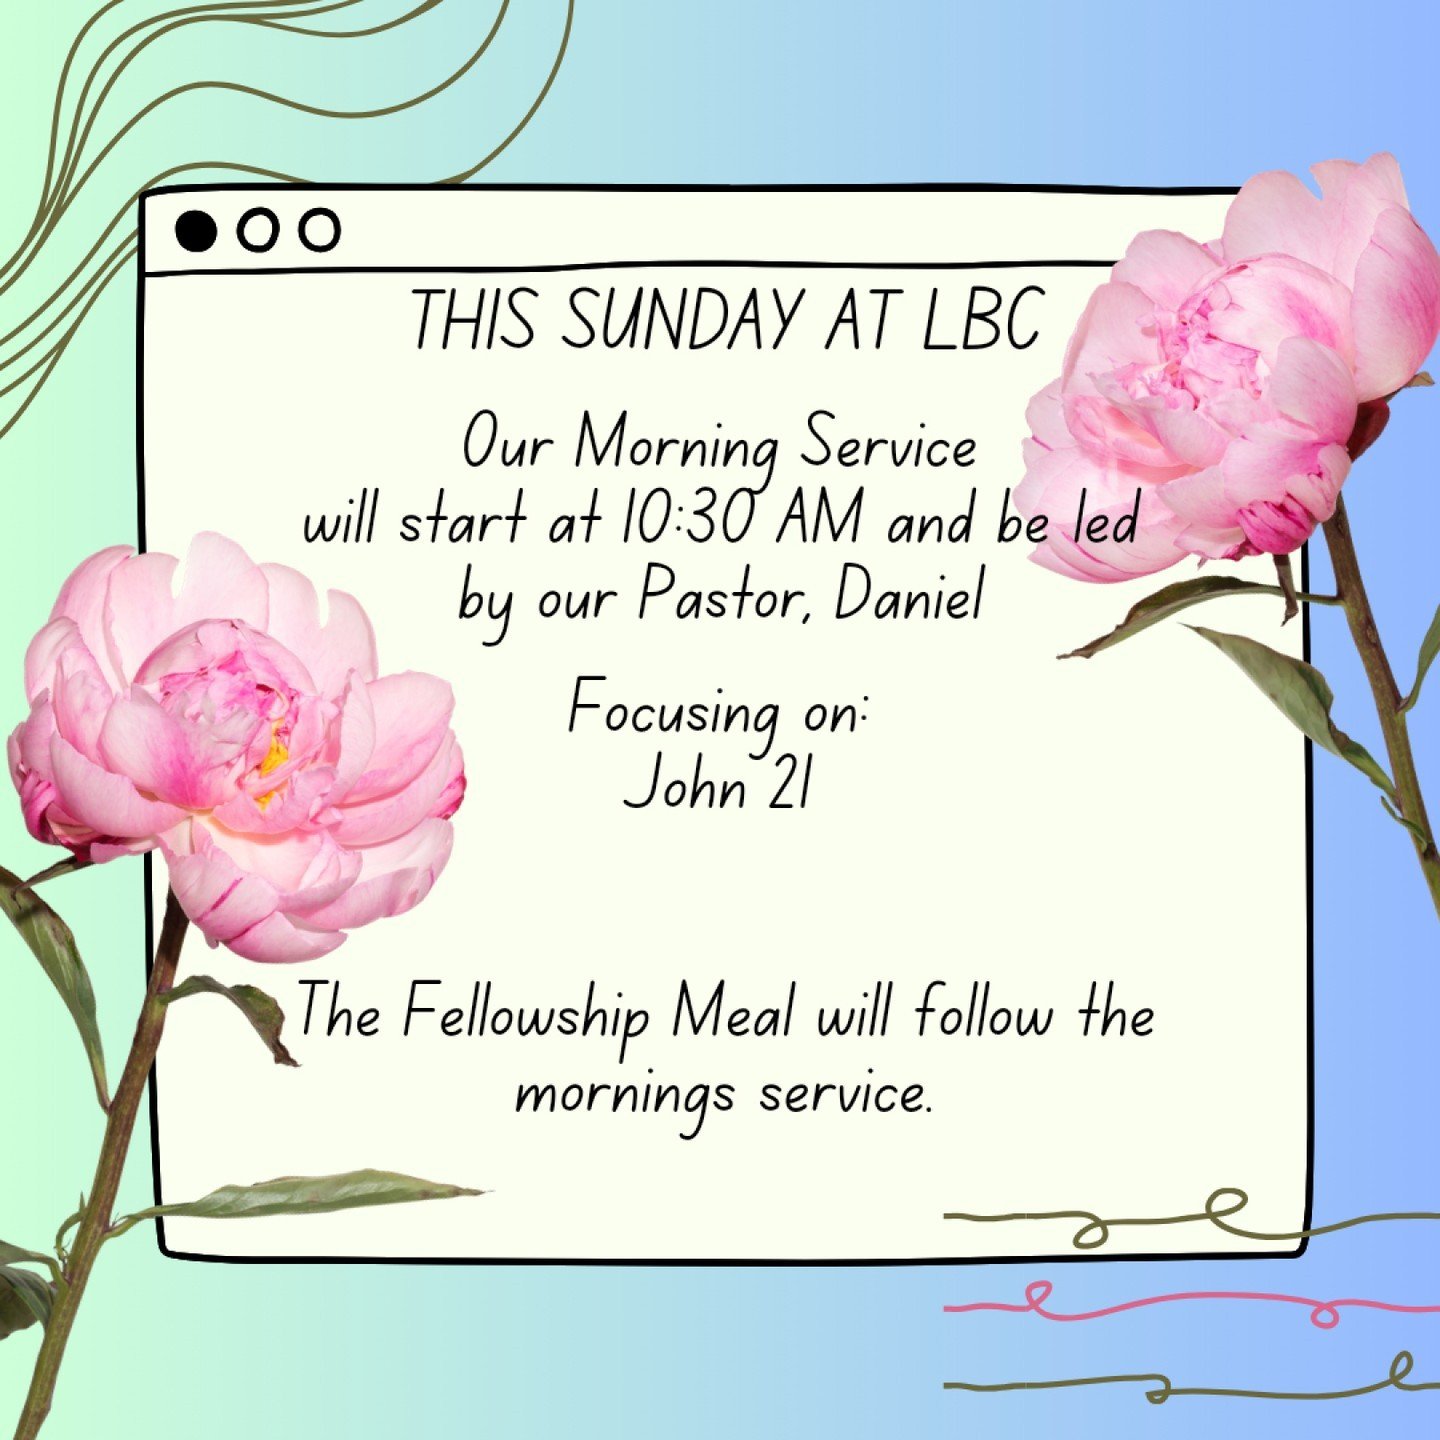 Please join us this Sunday at Lincoln Baptist Church  from 10:00am for refreshments and fellowship before the service starts at 10:30am where our Pastor, Daniel will be focusing on John 21.

After the service please feel free to stay for our first fe